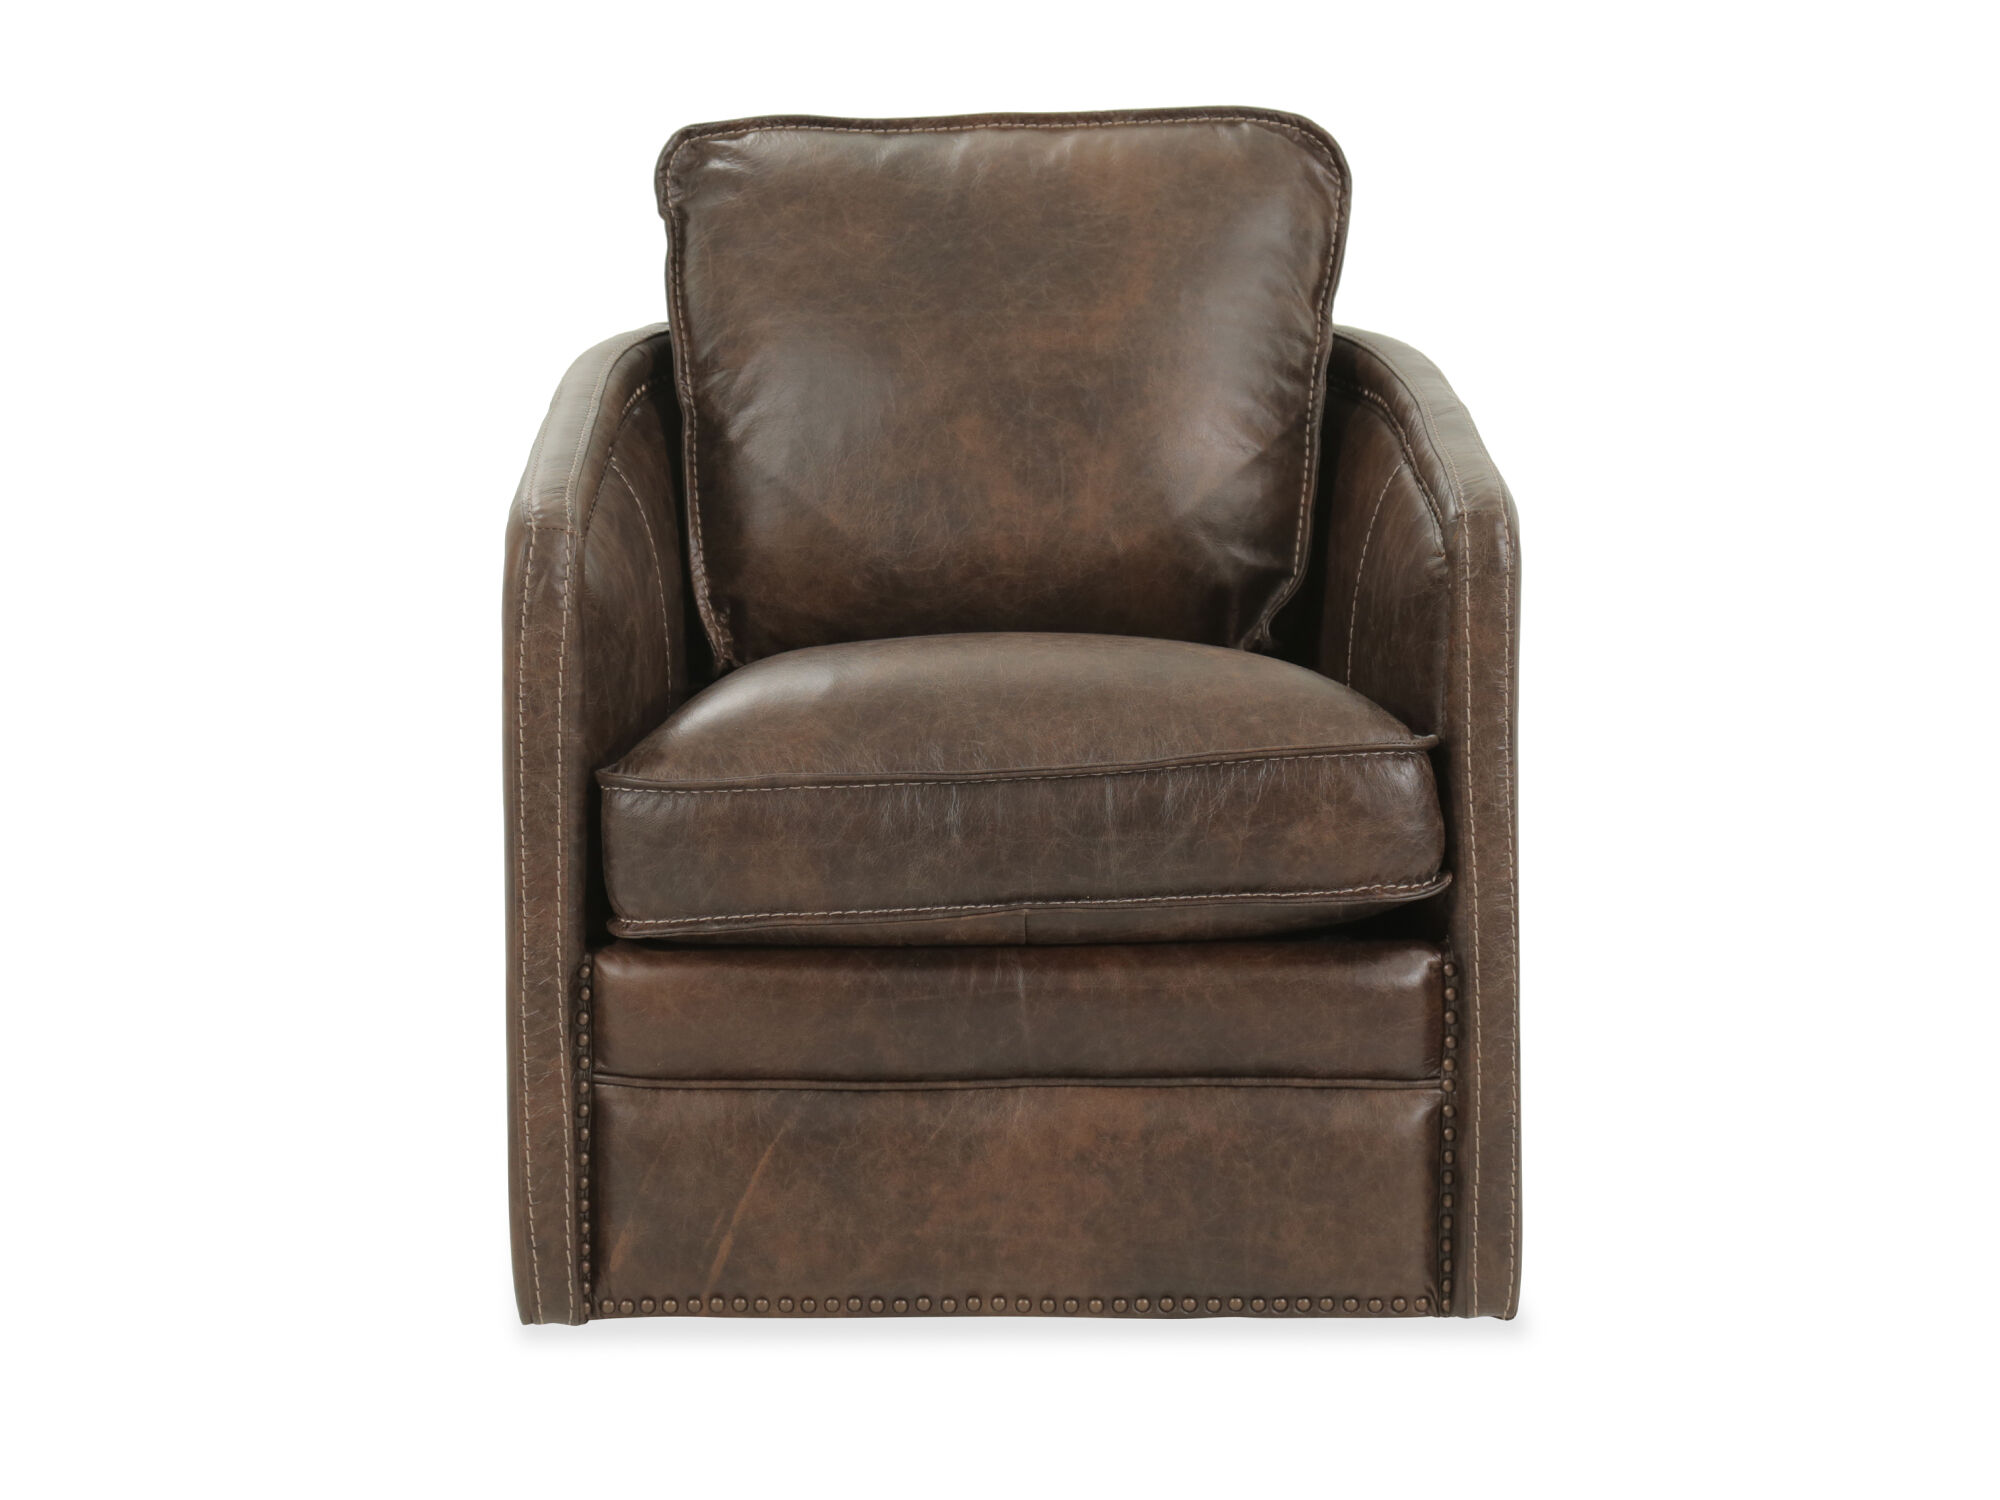 SelfCentering Leather 36" Swivel Chair in Brown Mathis